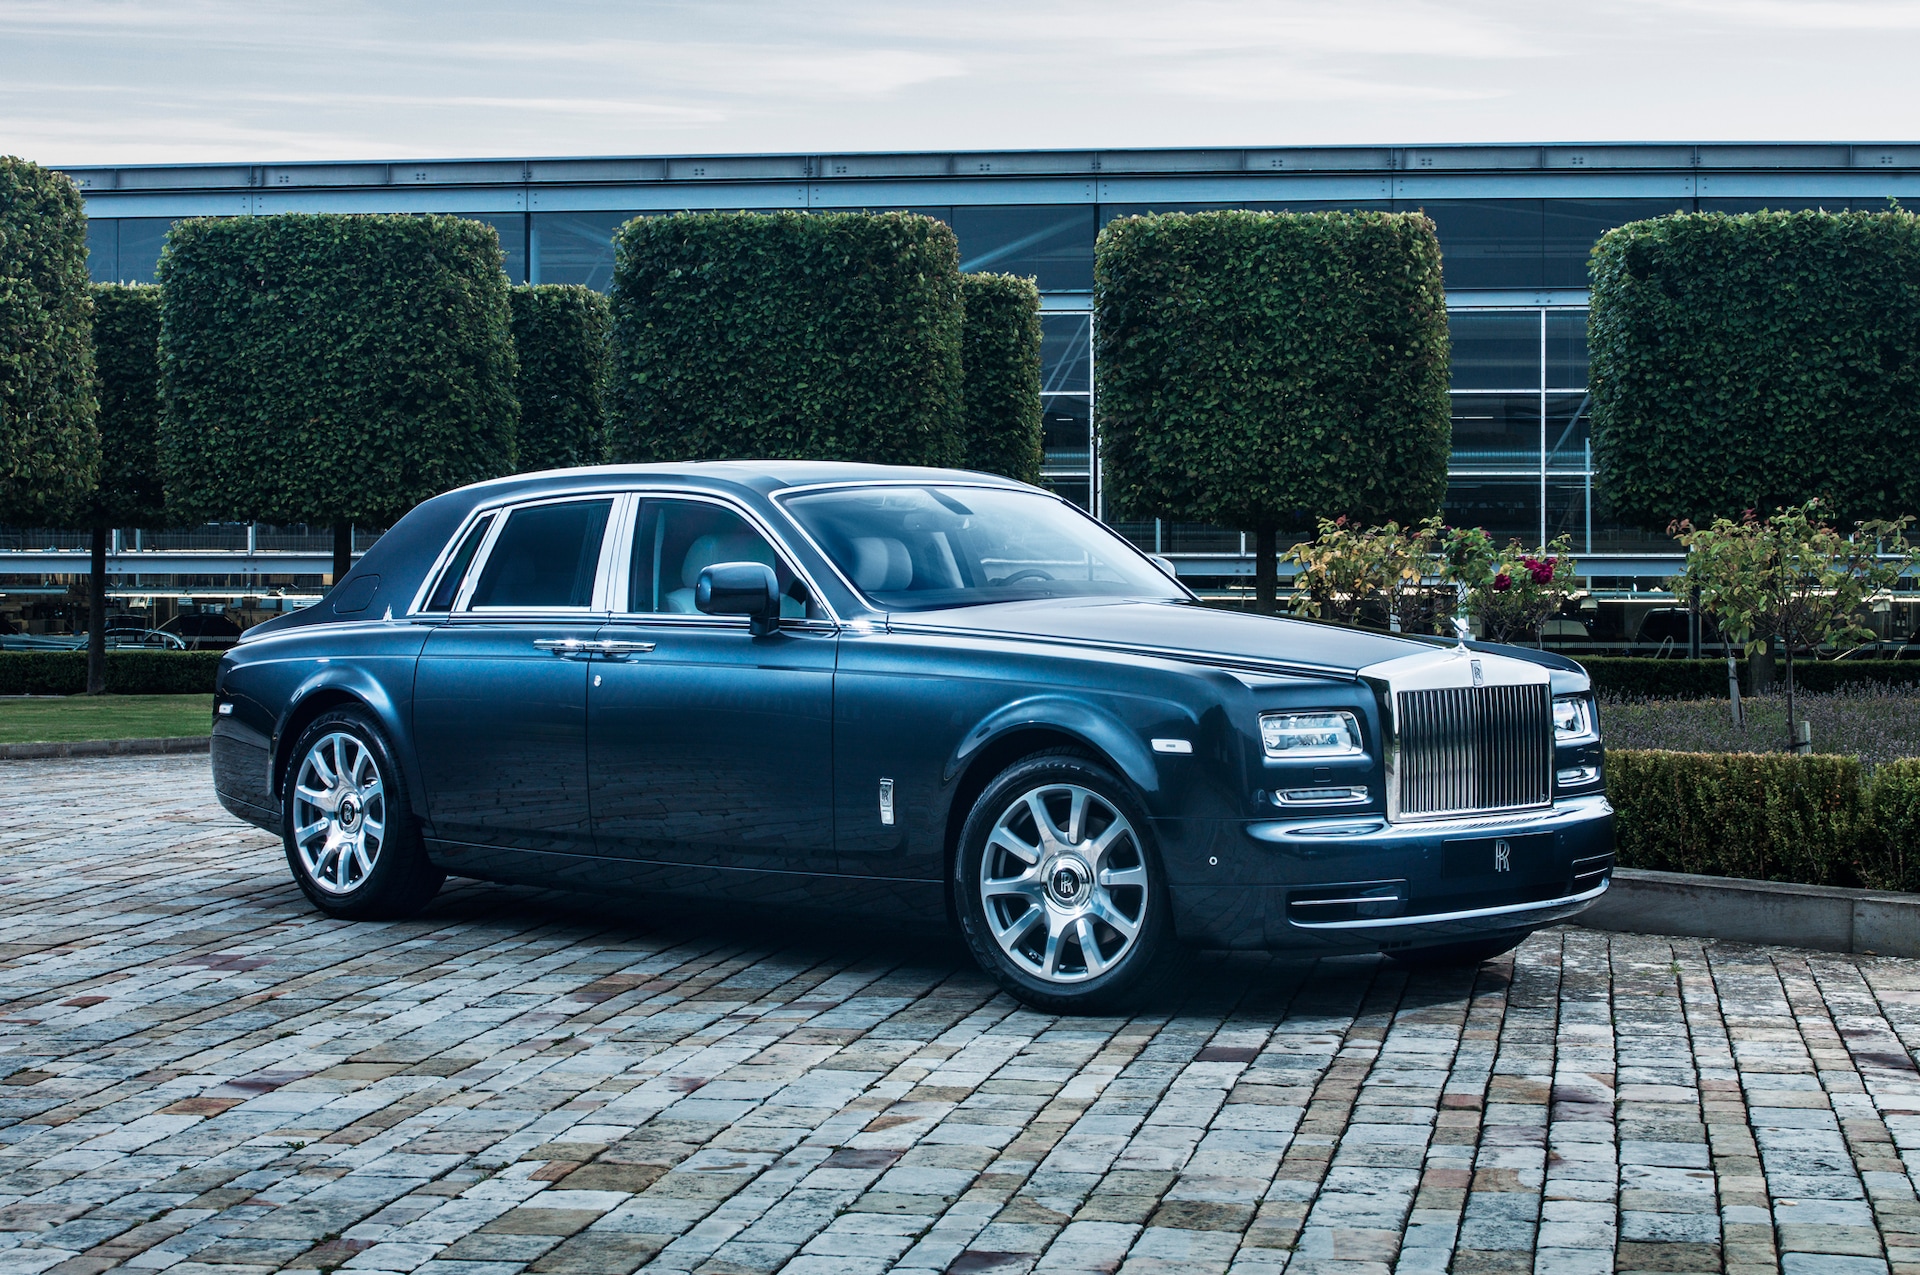 2015 Rolls-Royce Phantom Prices, Reviews, and Photos - MotorTrend